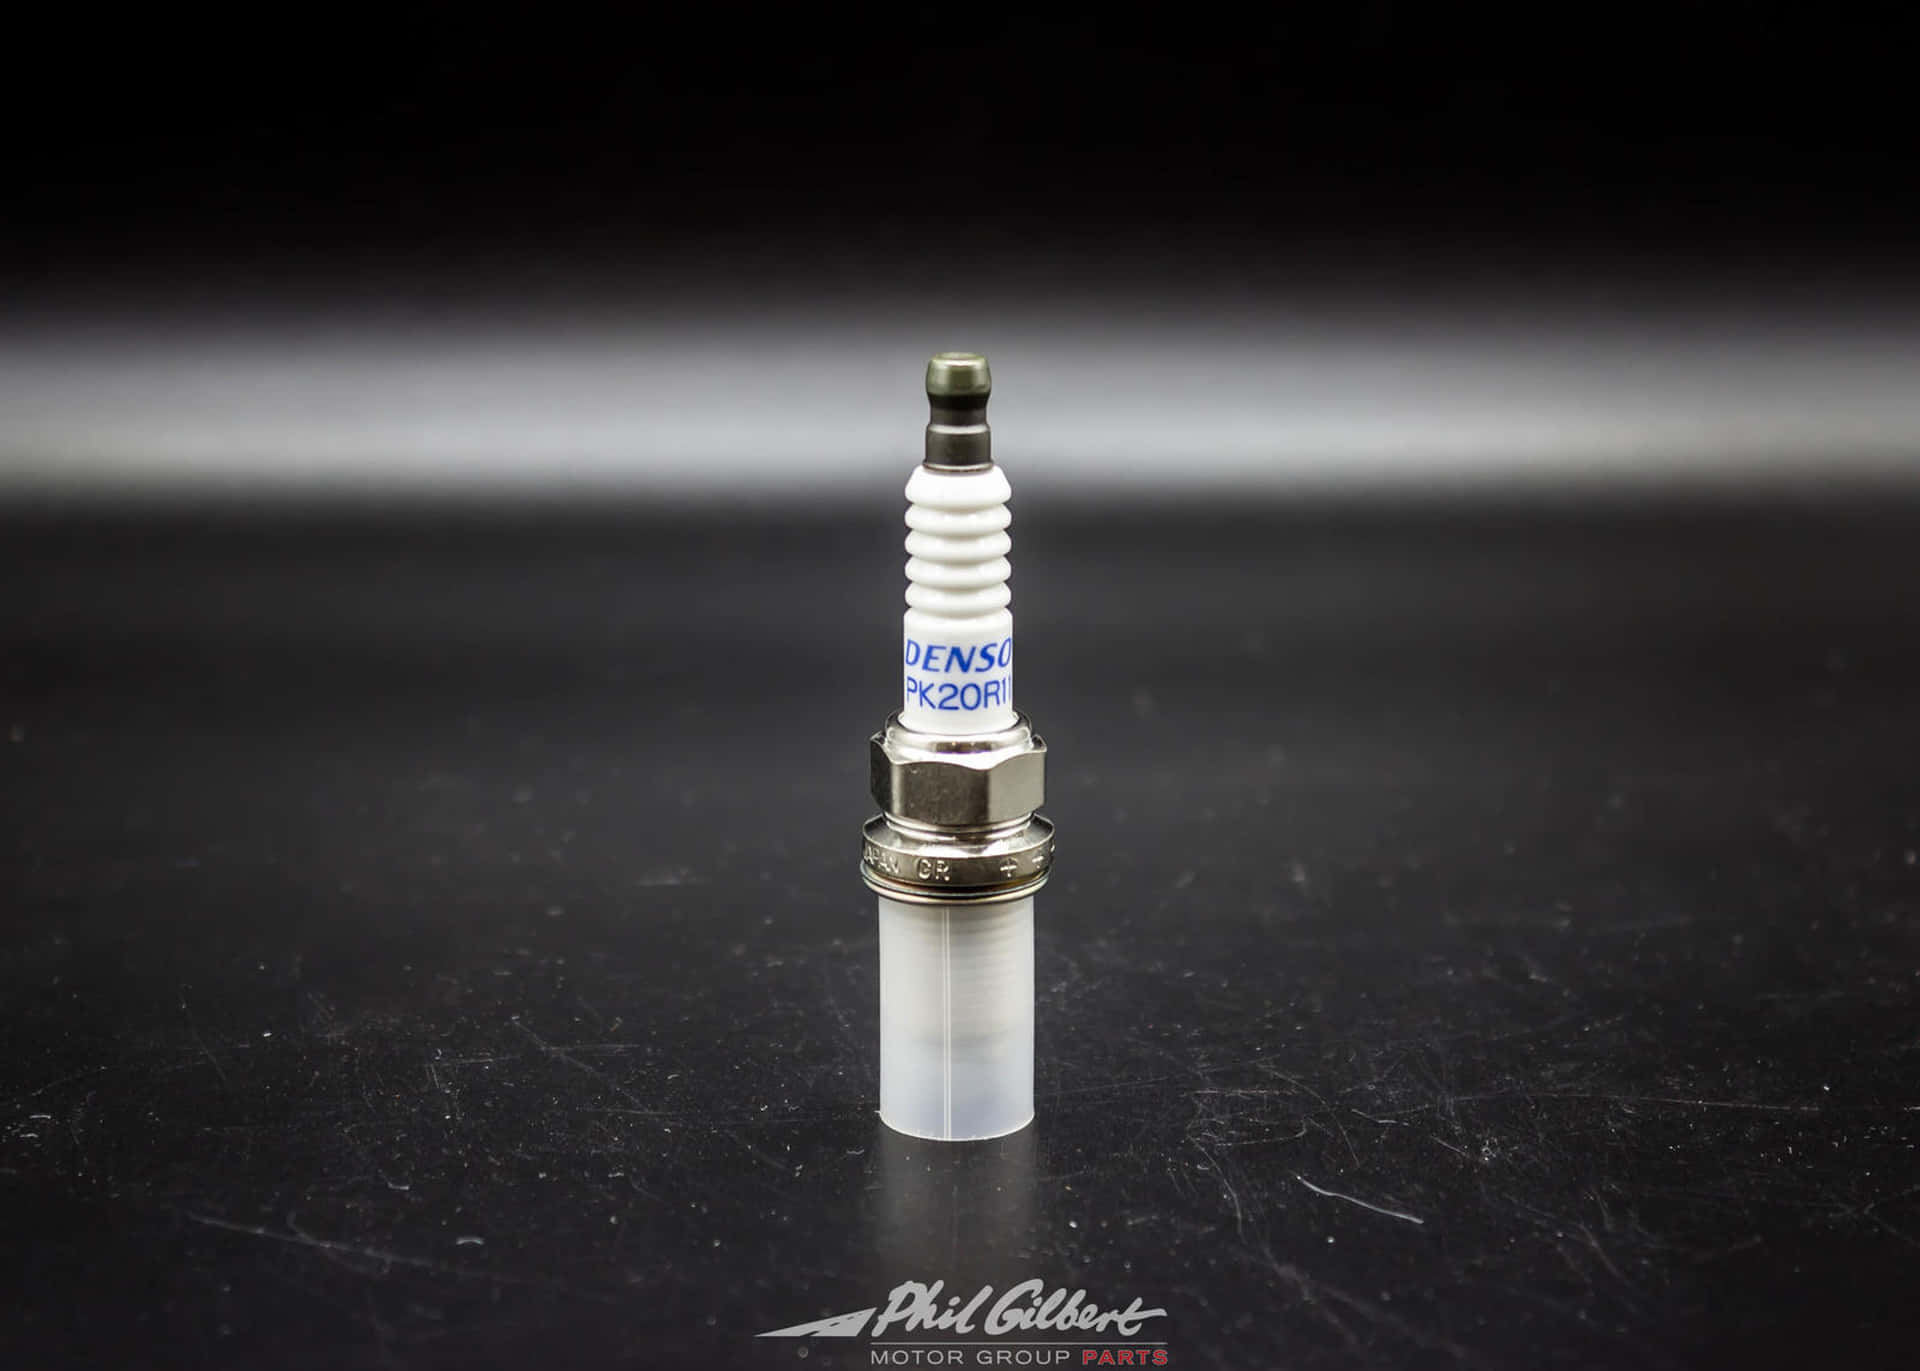 "Sparks of Innovation - A Close-Up Look at a Spark Plug" Wallpaper